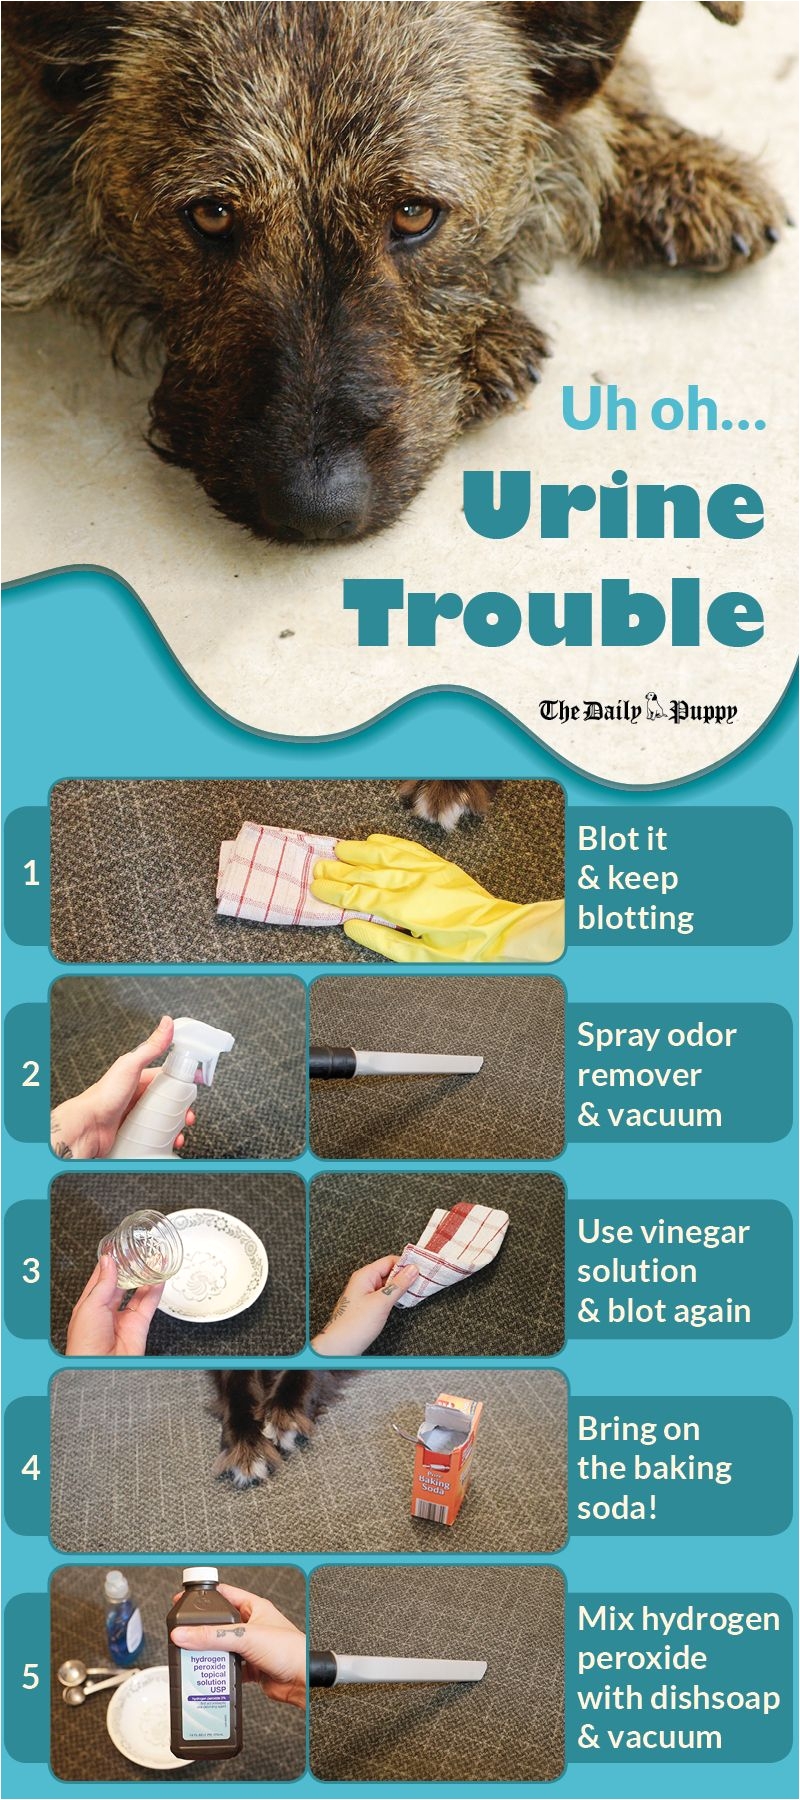 if traces of urine odor remain on your carpet from an unfortunate accident that odor may signal to your pet that this is where you go